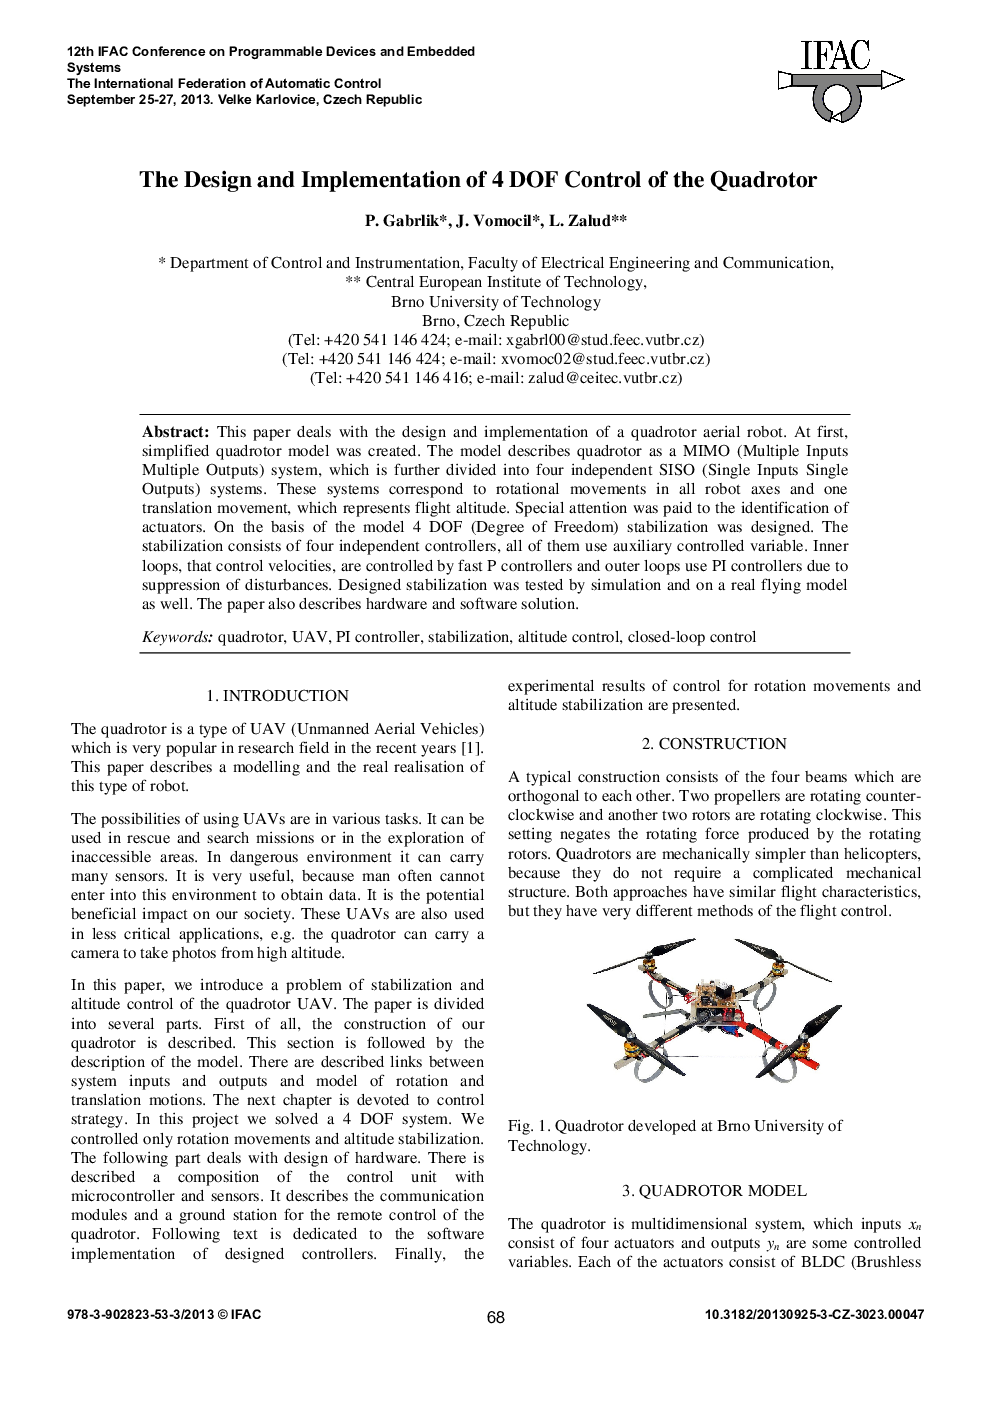 The Design and Implementation of 4 DOF Control of the Quadrotor